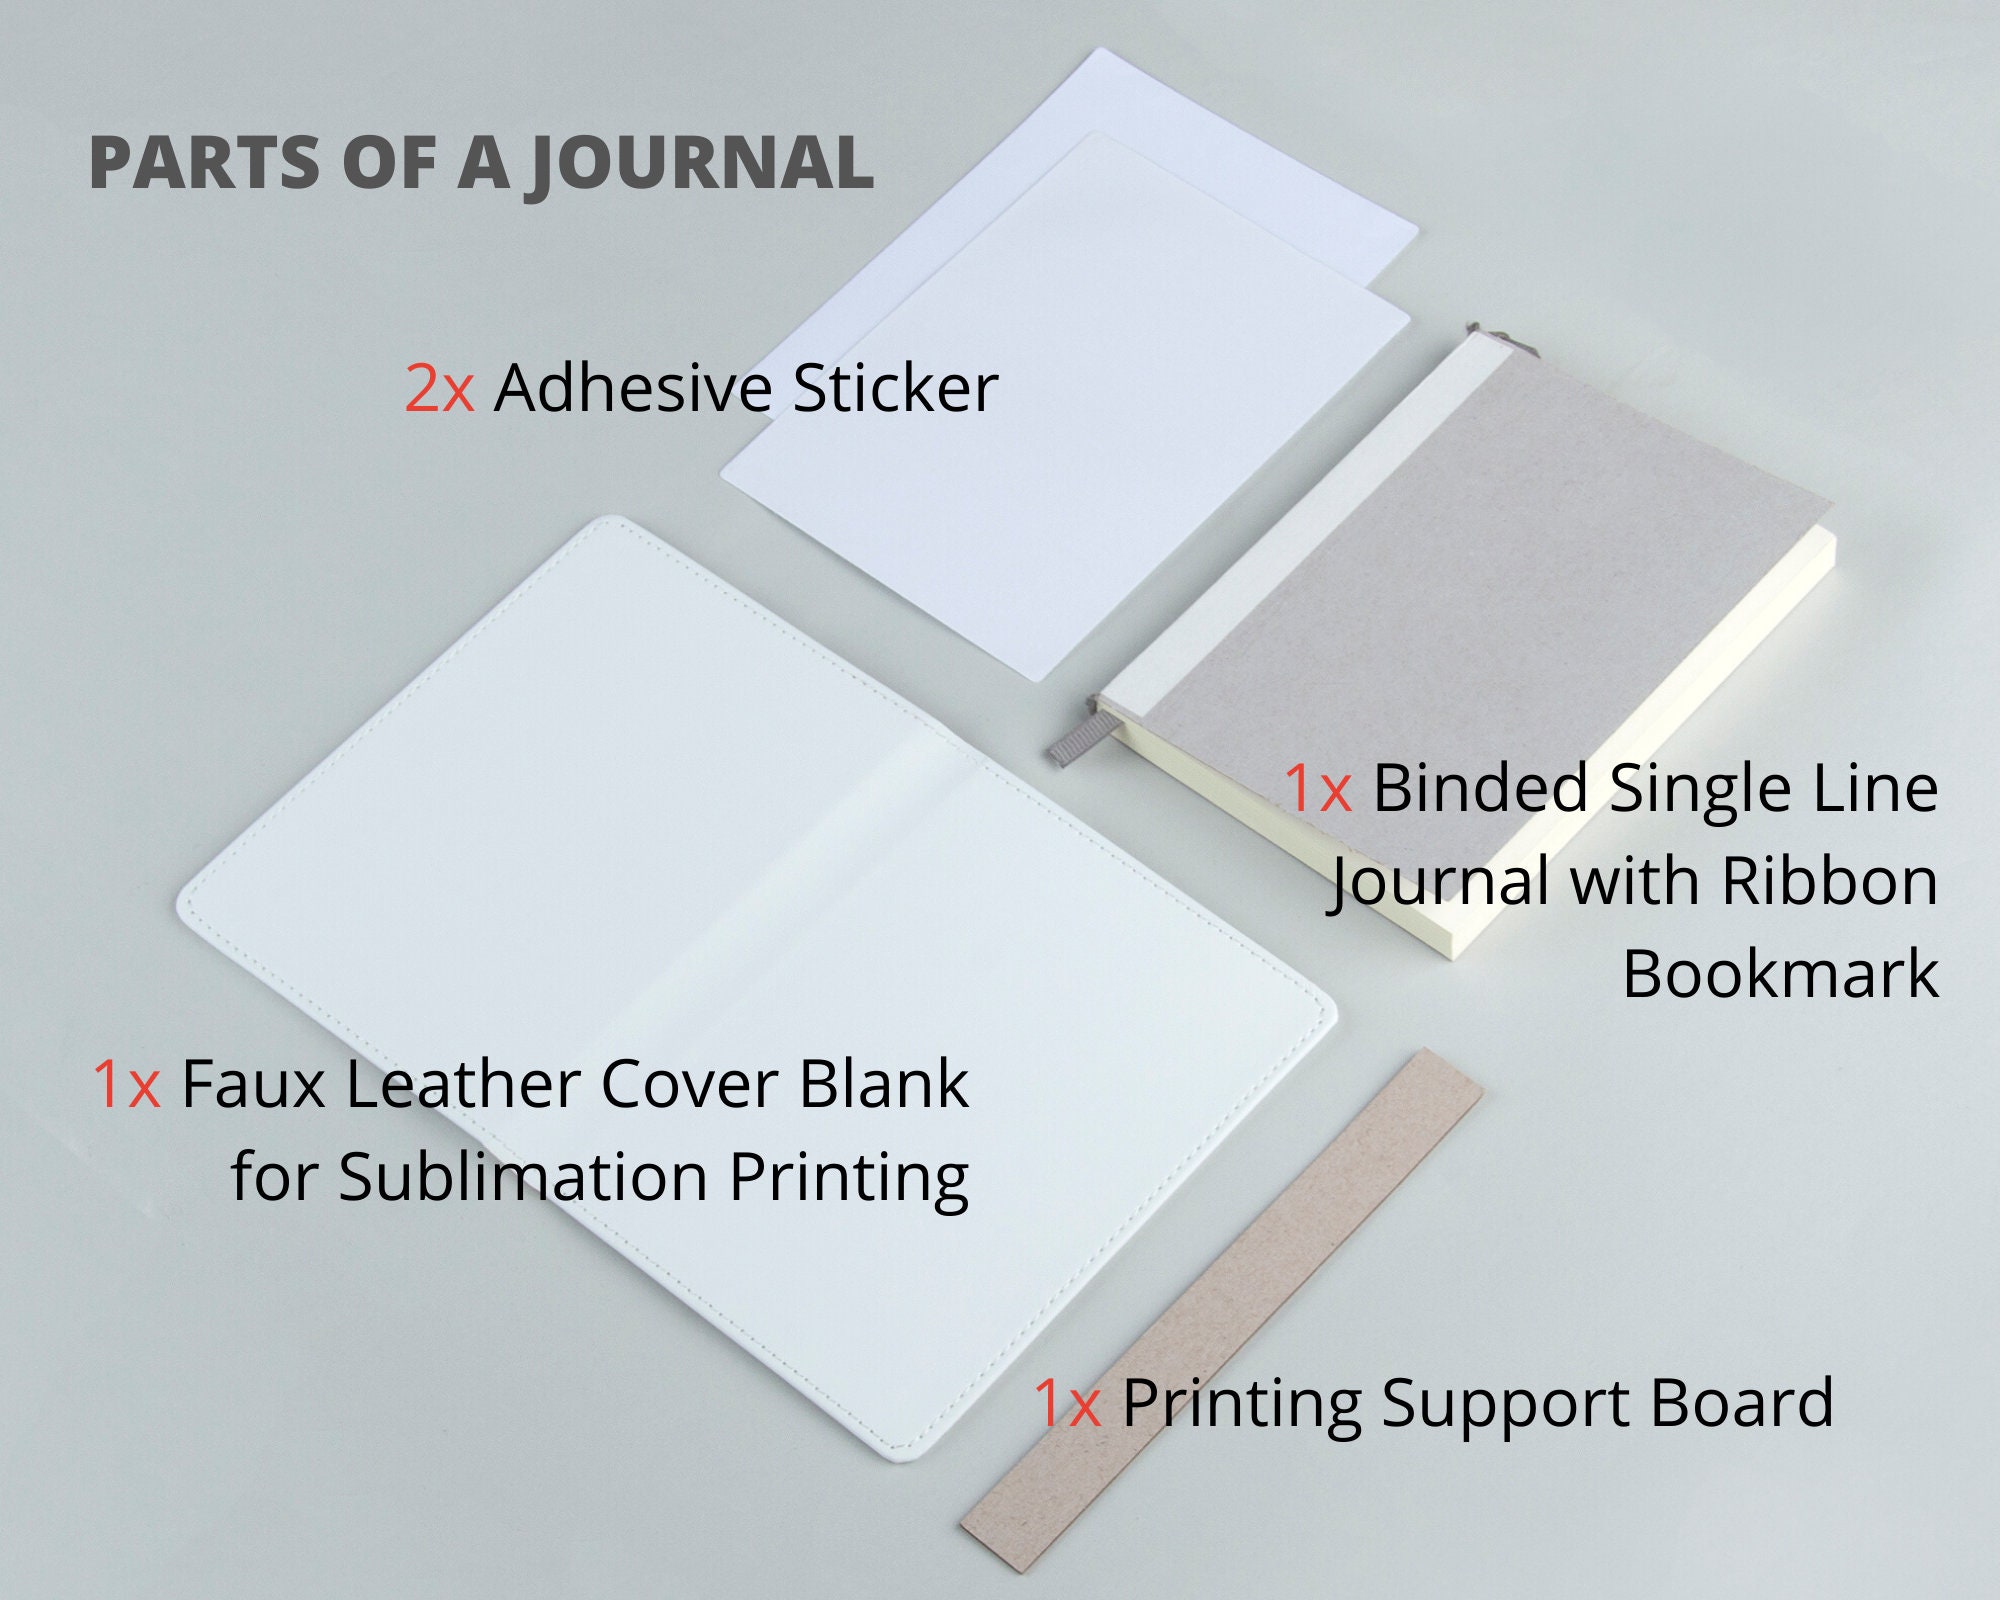 Sublimation Journals How to sublimate a journal 